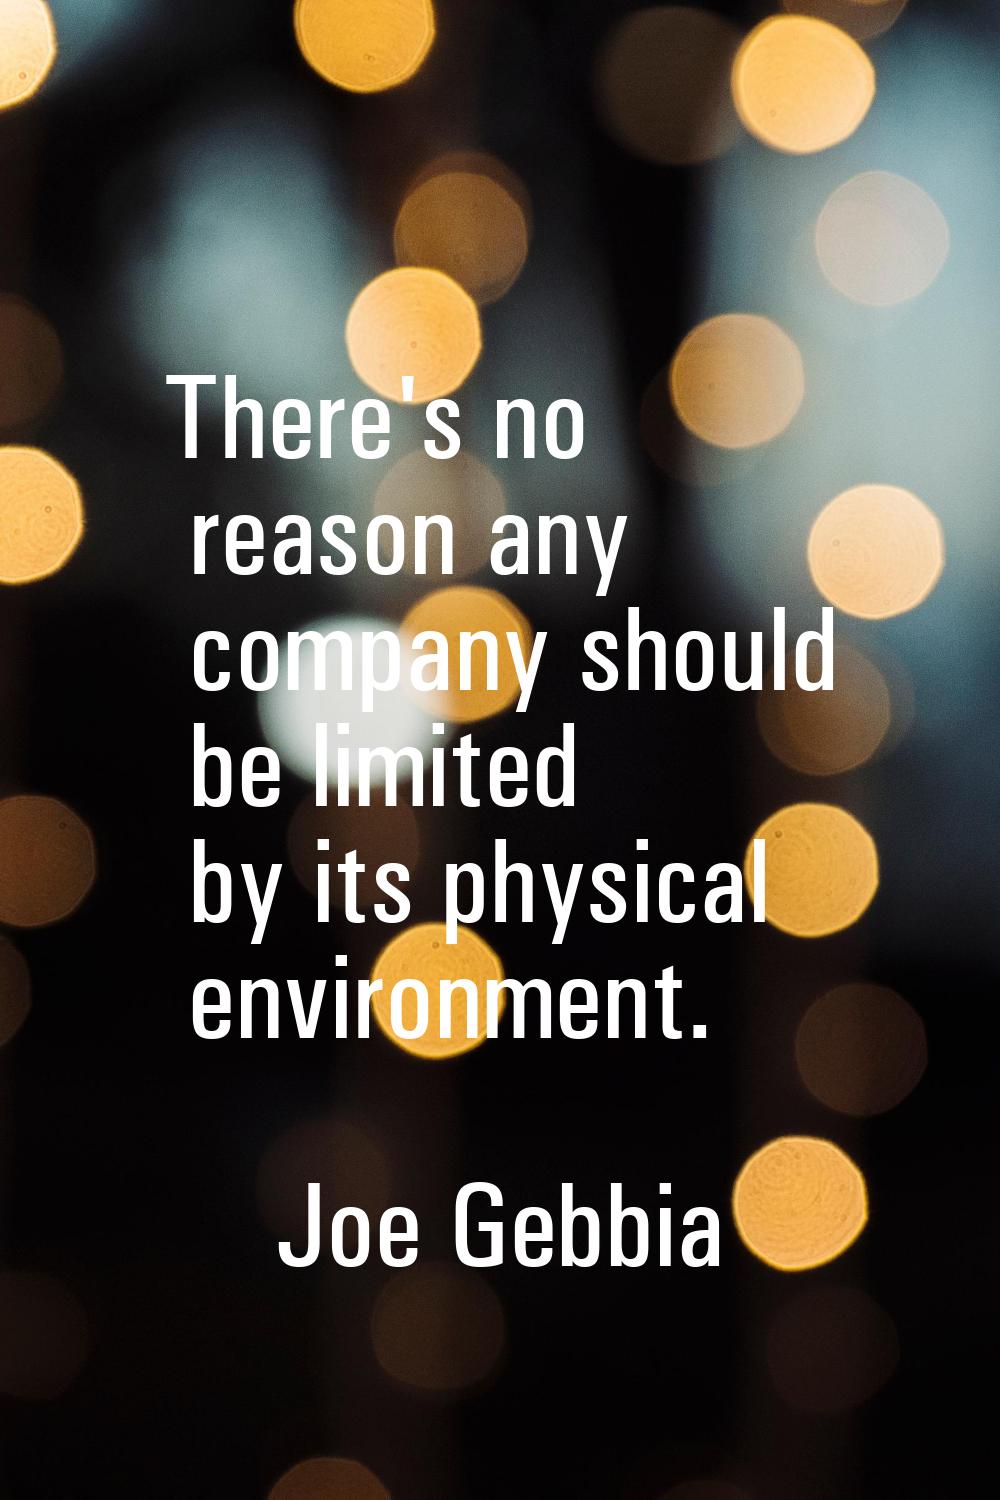 There's no reason any company should be limited by its physical environment.